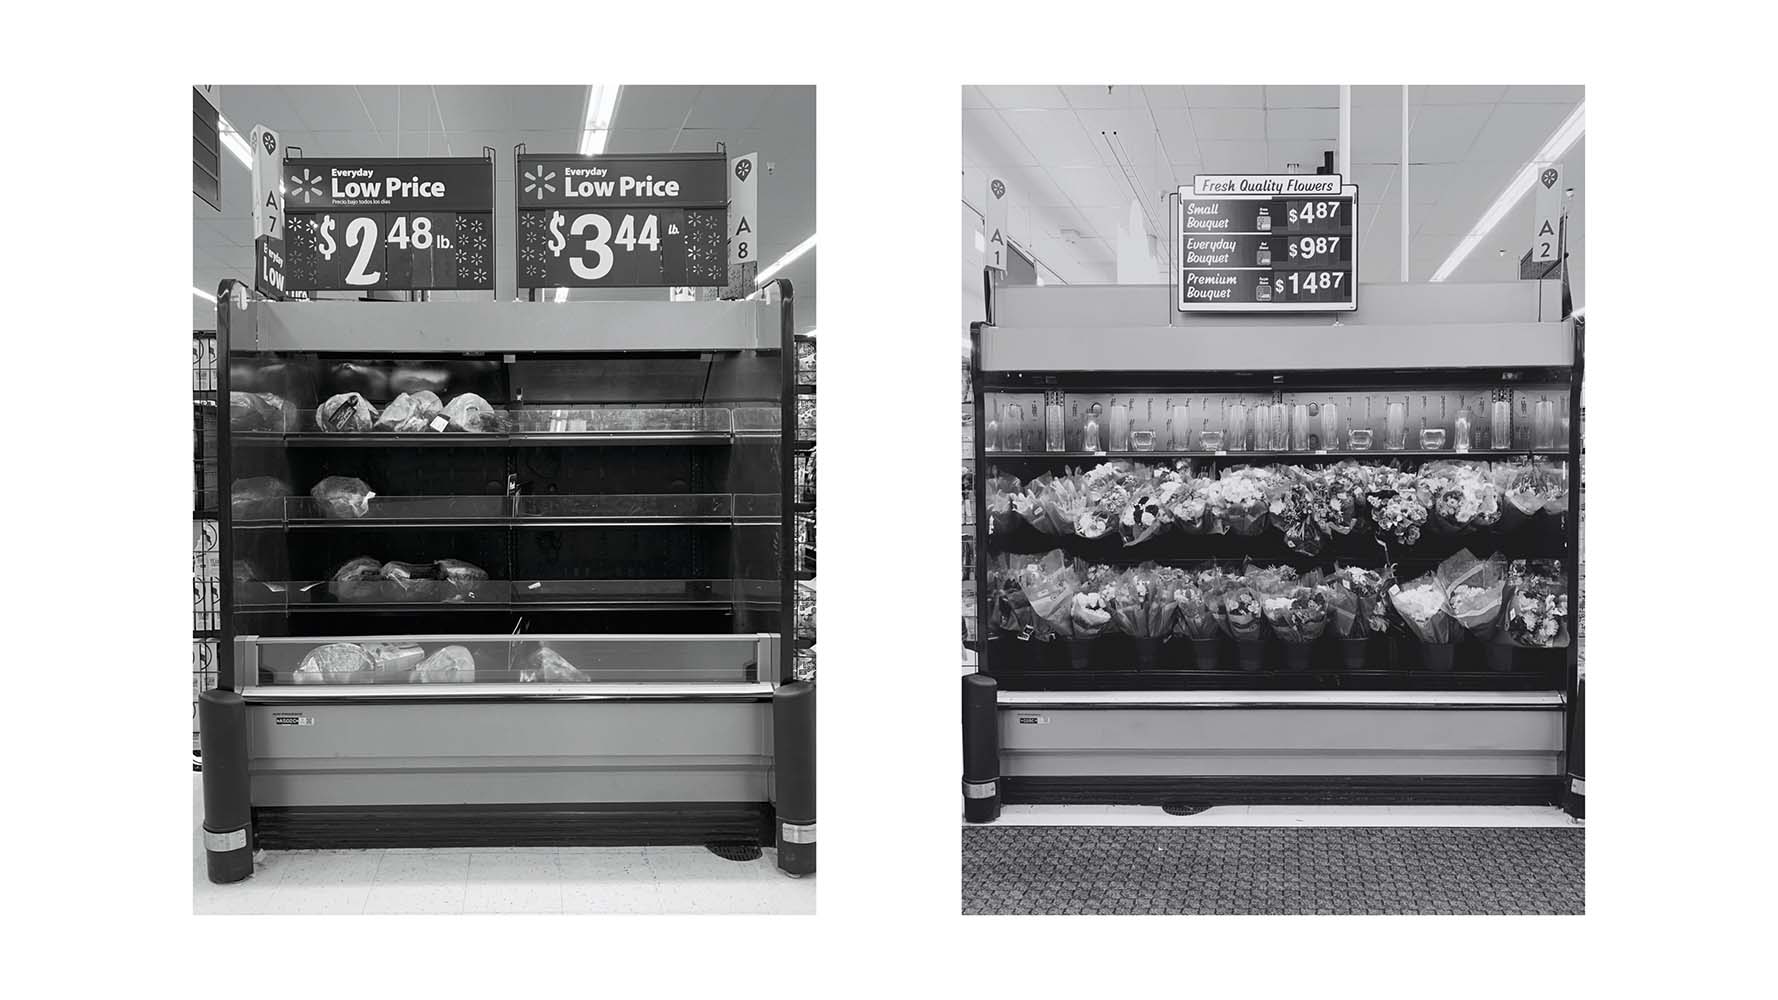 diptych of empty and full store shelves